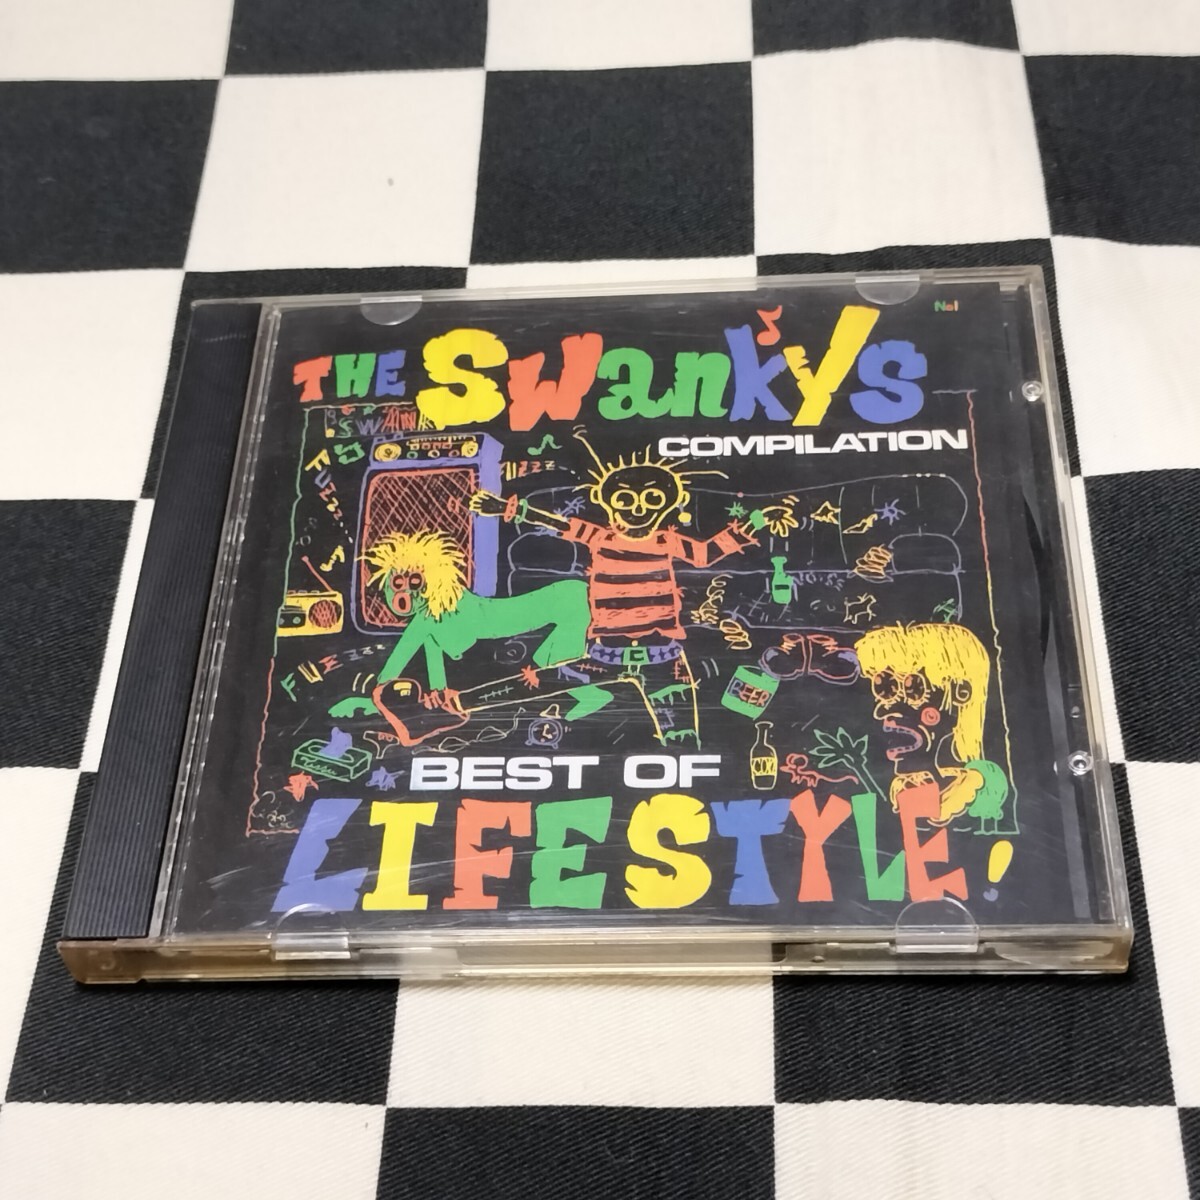 THE SWANKYS CD 「LIFE STYLE」 スワンキーズ SPACE INVADERS MOUSE GAI 害 KWR LYDIA CATS SLICKS ROBOTS NO-CUT LAST CHILD パンク PUNKの画像1